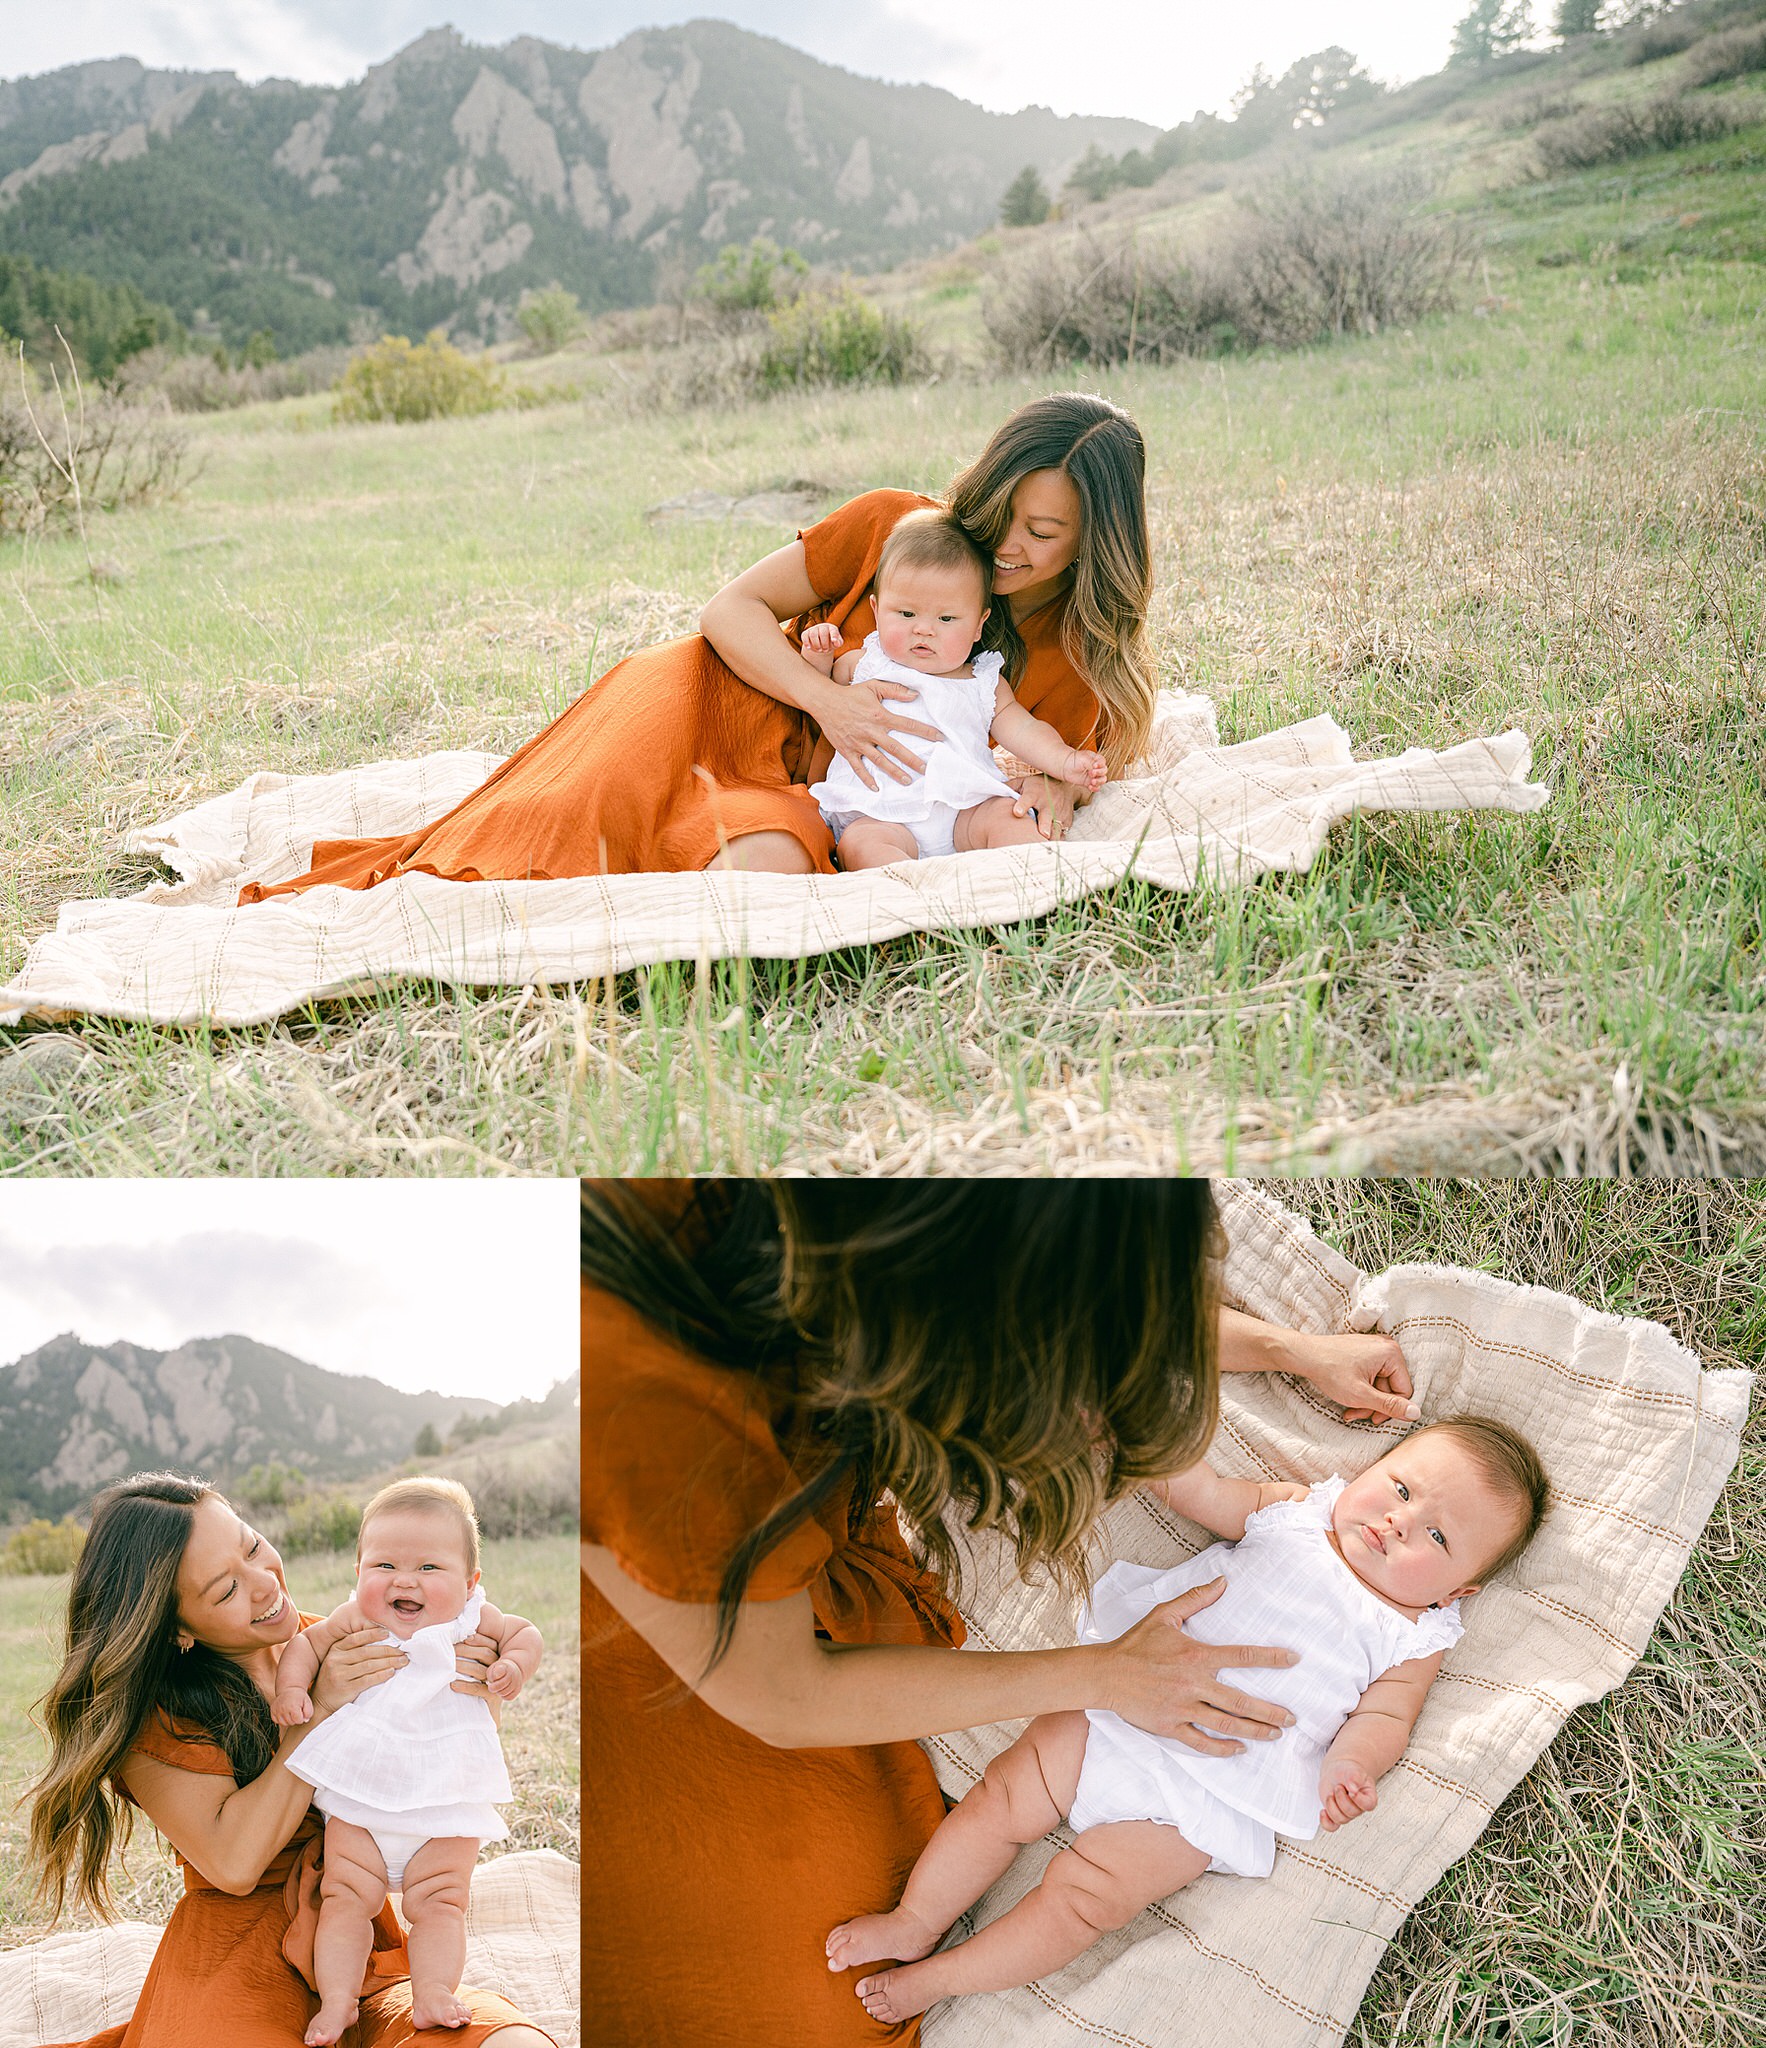 A young mother playing with a blanket with her six month baby during a photo session in Boulder, Colorado with mountains in the background.